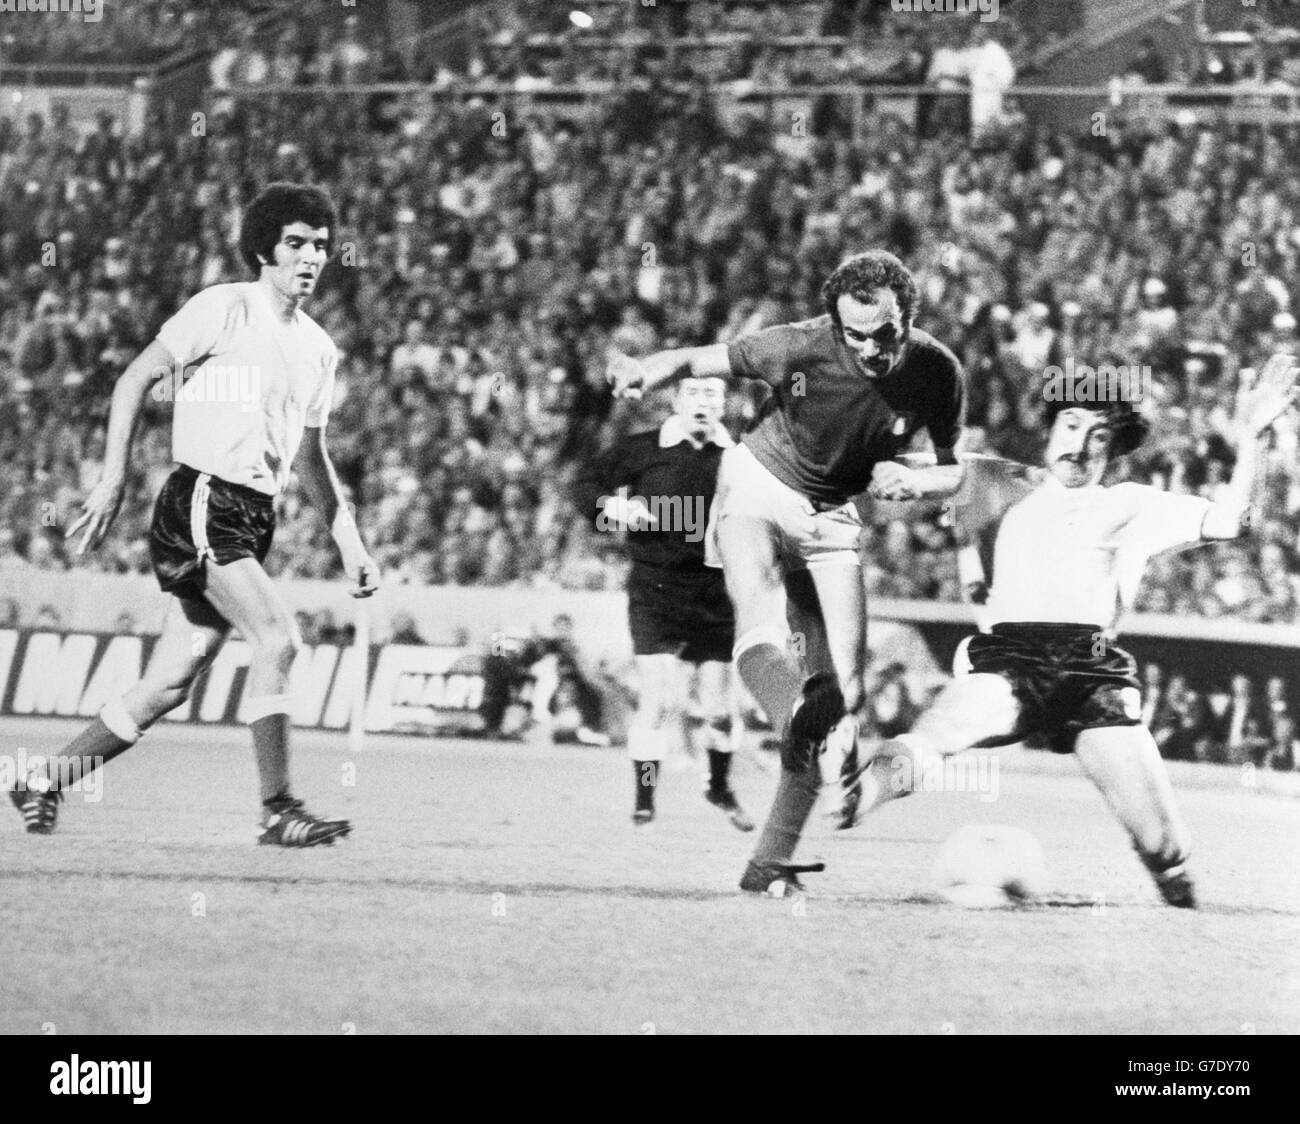 Italy's Sandro Mazzola squeezes past Argentina defenders Roberto Telch (left) and Ruben Oscar Glaria during a World Cup match at Stuttgart's Neckar Stadium. Stock Photo